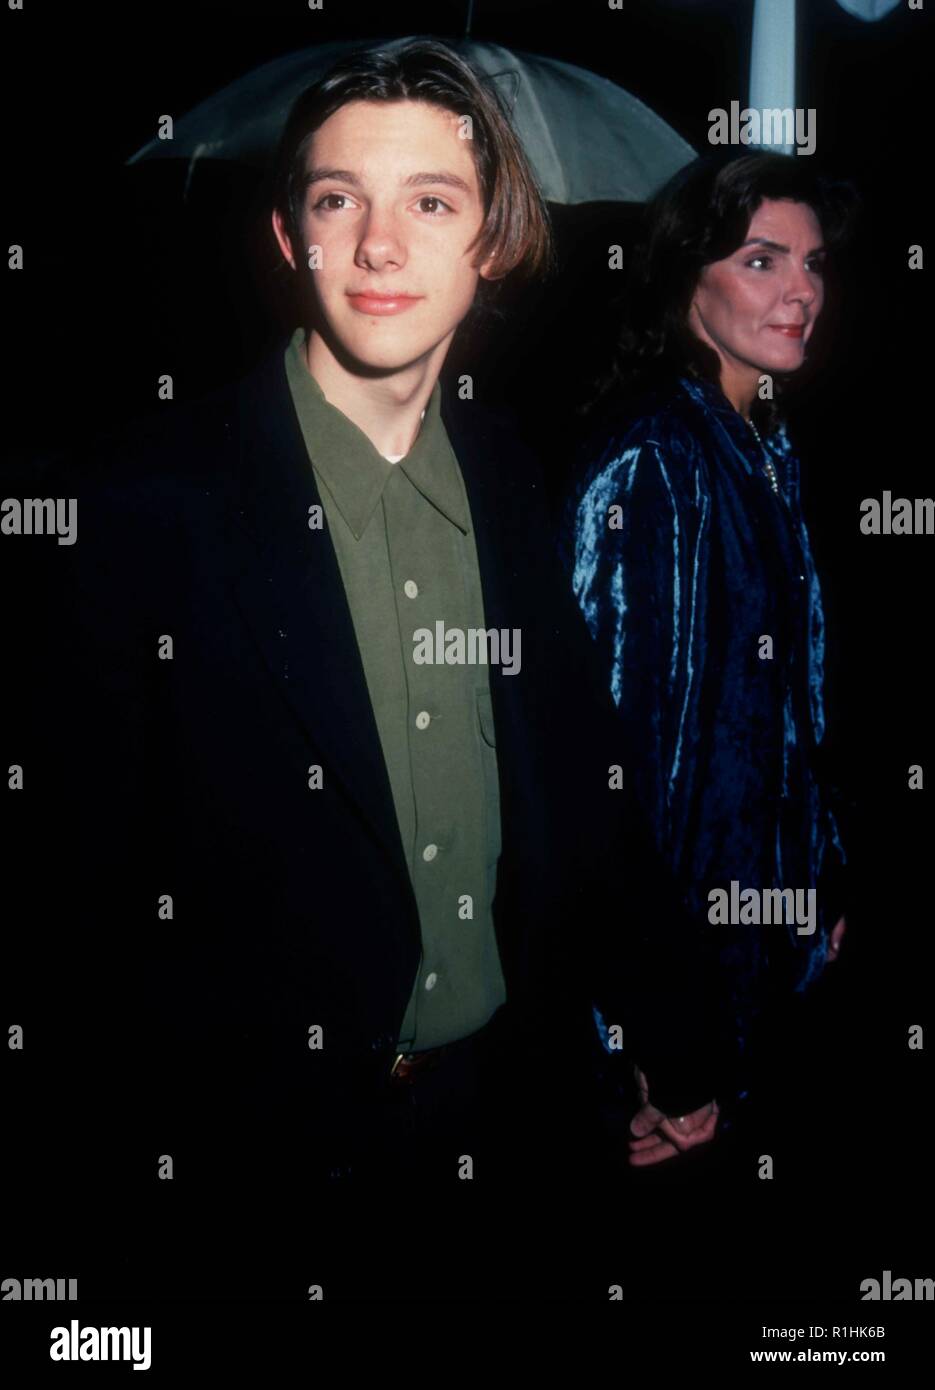 BEVERLY HILLS, CA - DECEMBER 17: Actor Lukas Haas attends the 'Leap Of Faith' Beverly Hills Premiere on December 17, 1992 at the Samuel Goldwyn Theatre in Beverly Hills, California. Photo by Barry King/Alamy Stock Photo Stock Photo